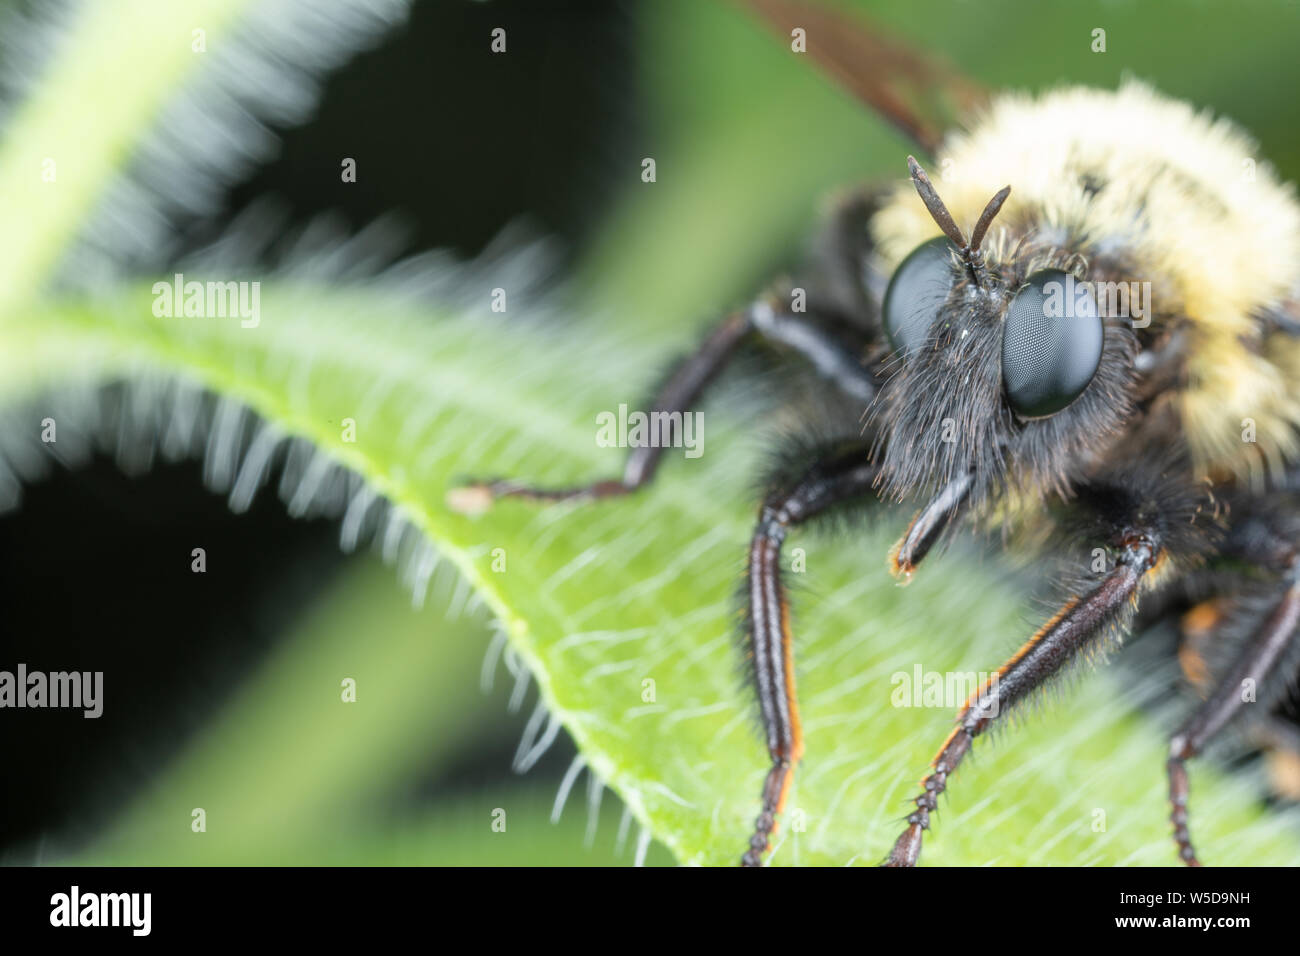 Robber Fly Bumble Bee Mimic Perched on a Green Leaf Stock Photo